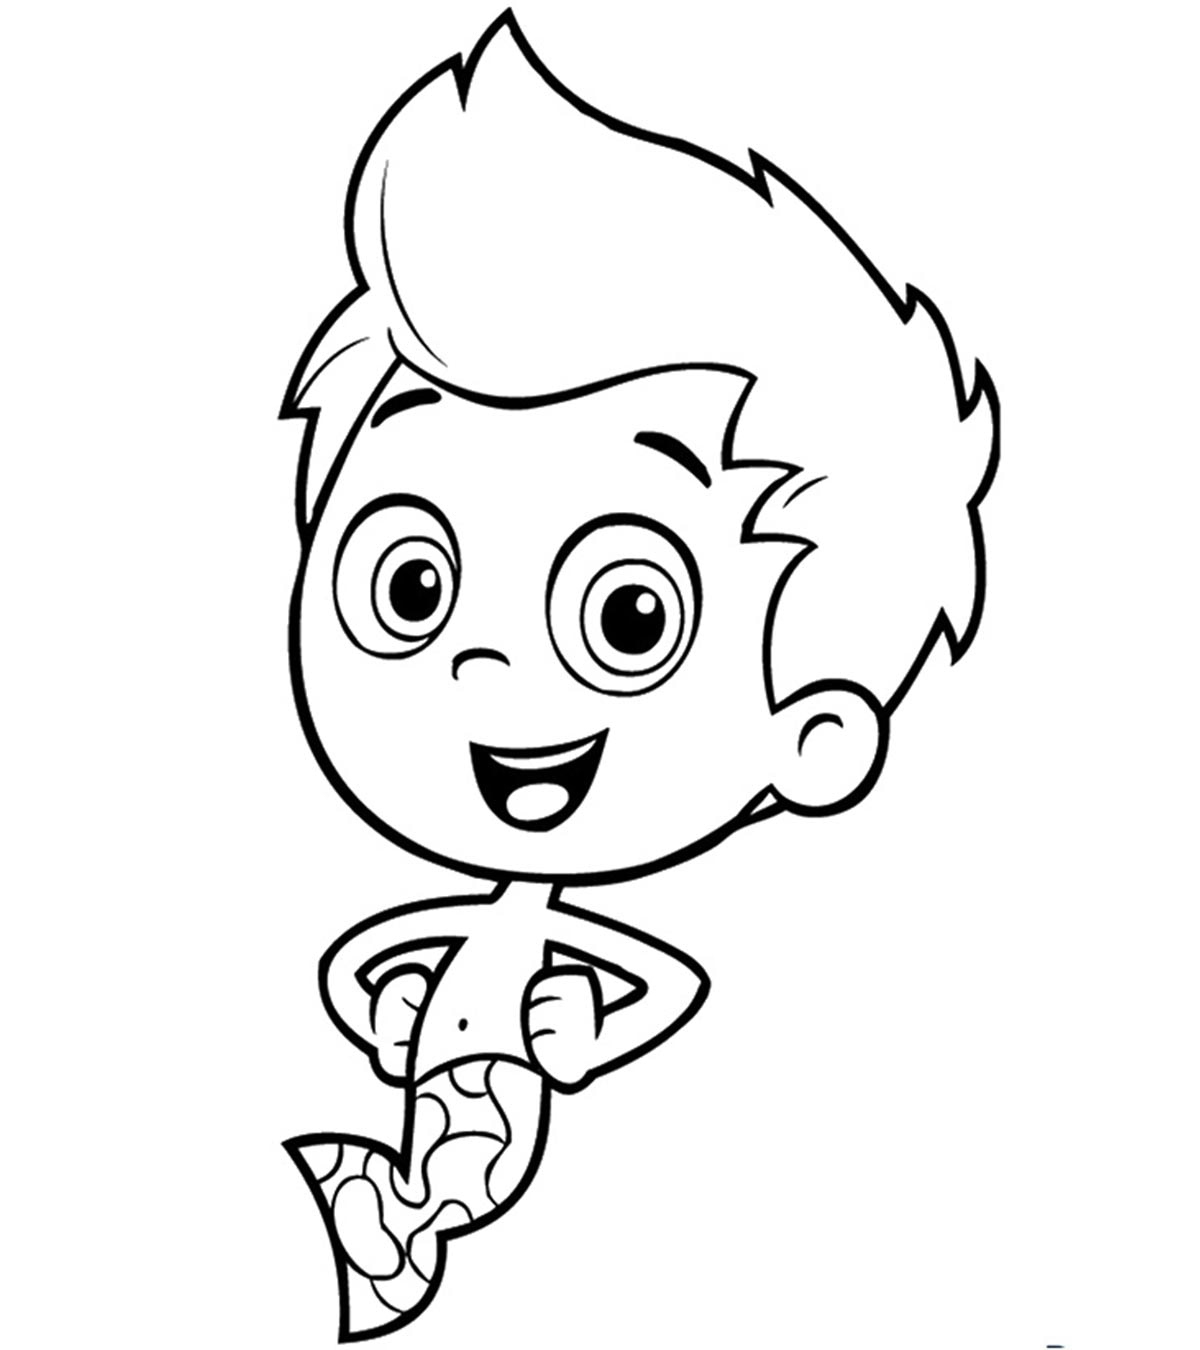 Bubble Guppies Coloring Pages - 25 Free Printable Sheets | Momjunction regarding Bubble Guppies Free Printables